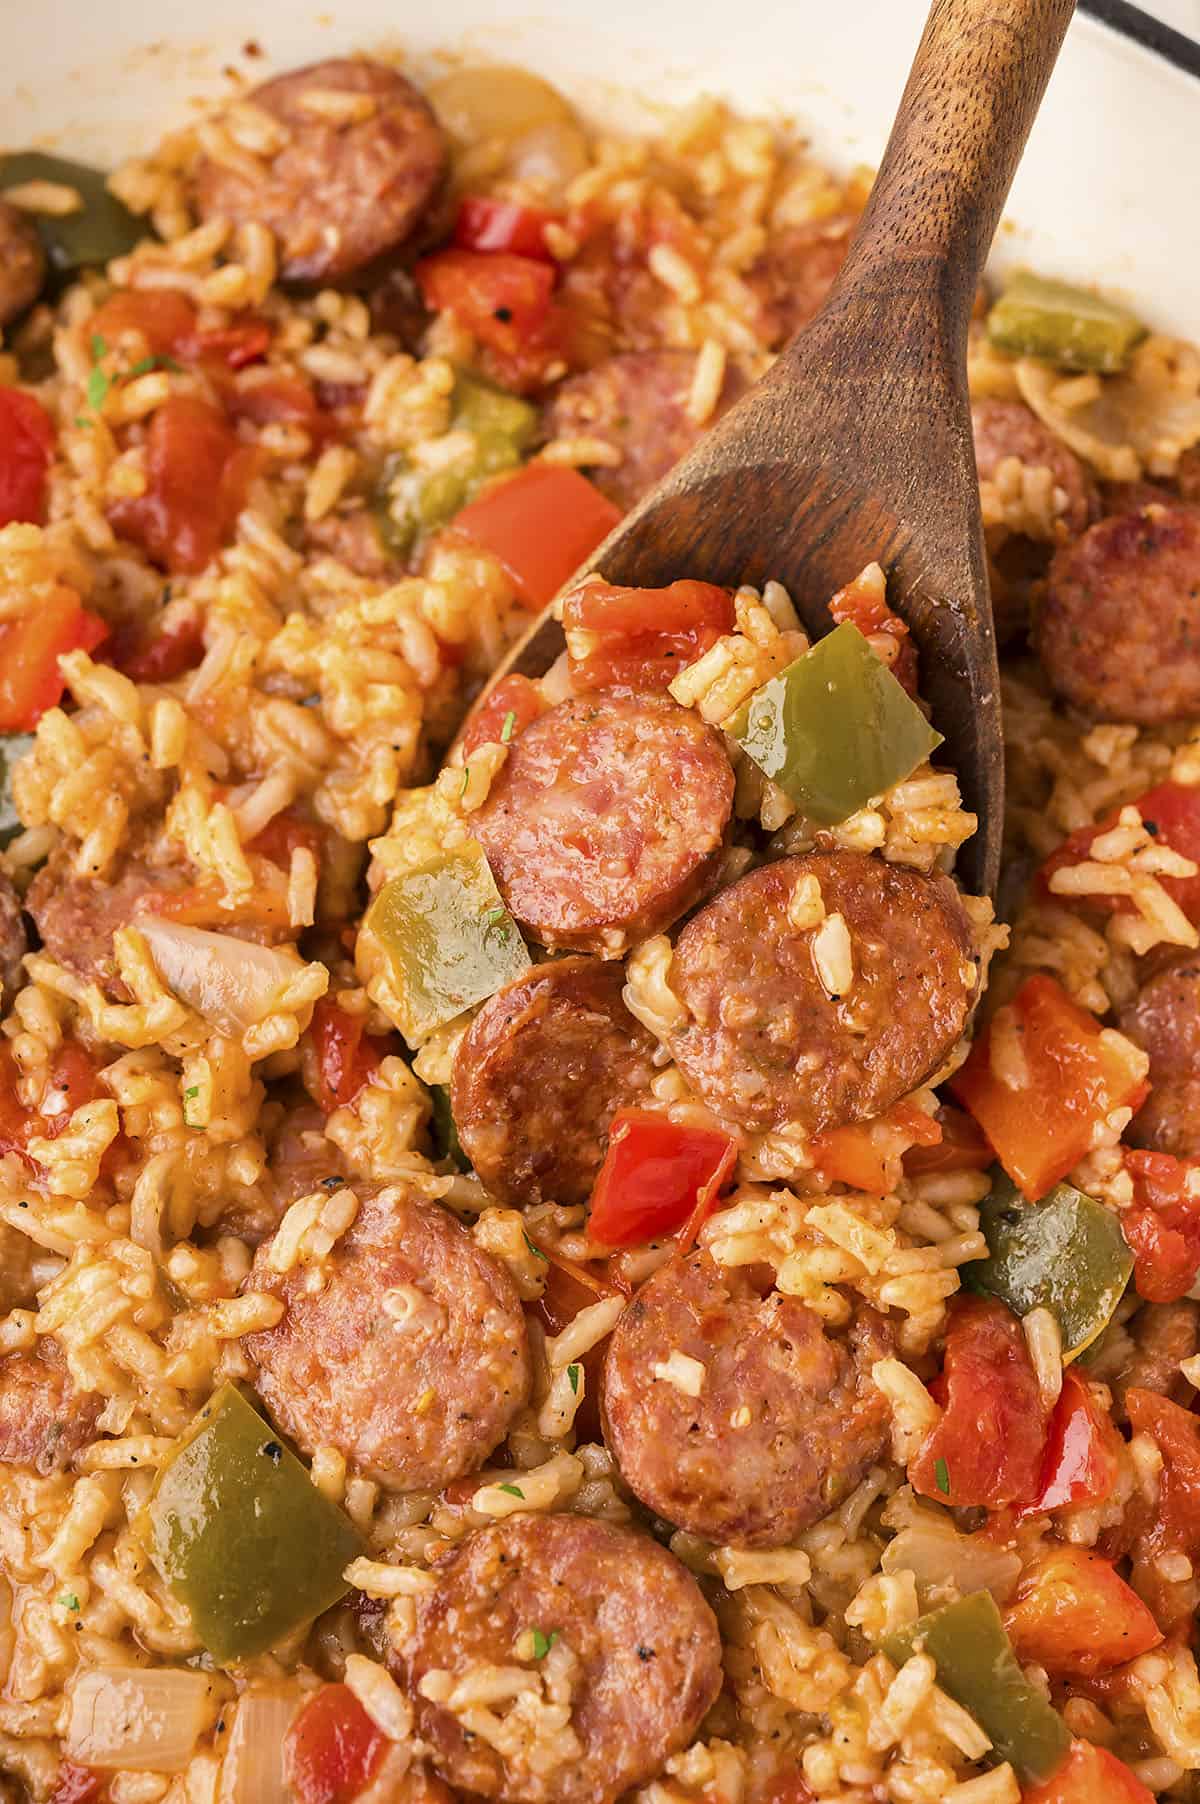 Cajun sausage and rice in a skillet with a wooden spoon.